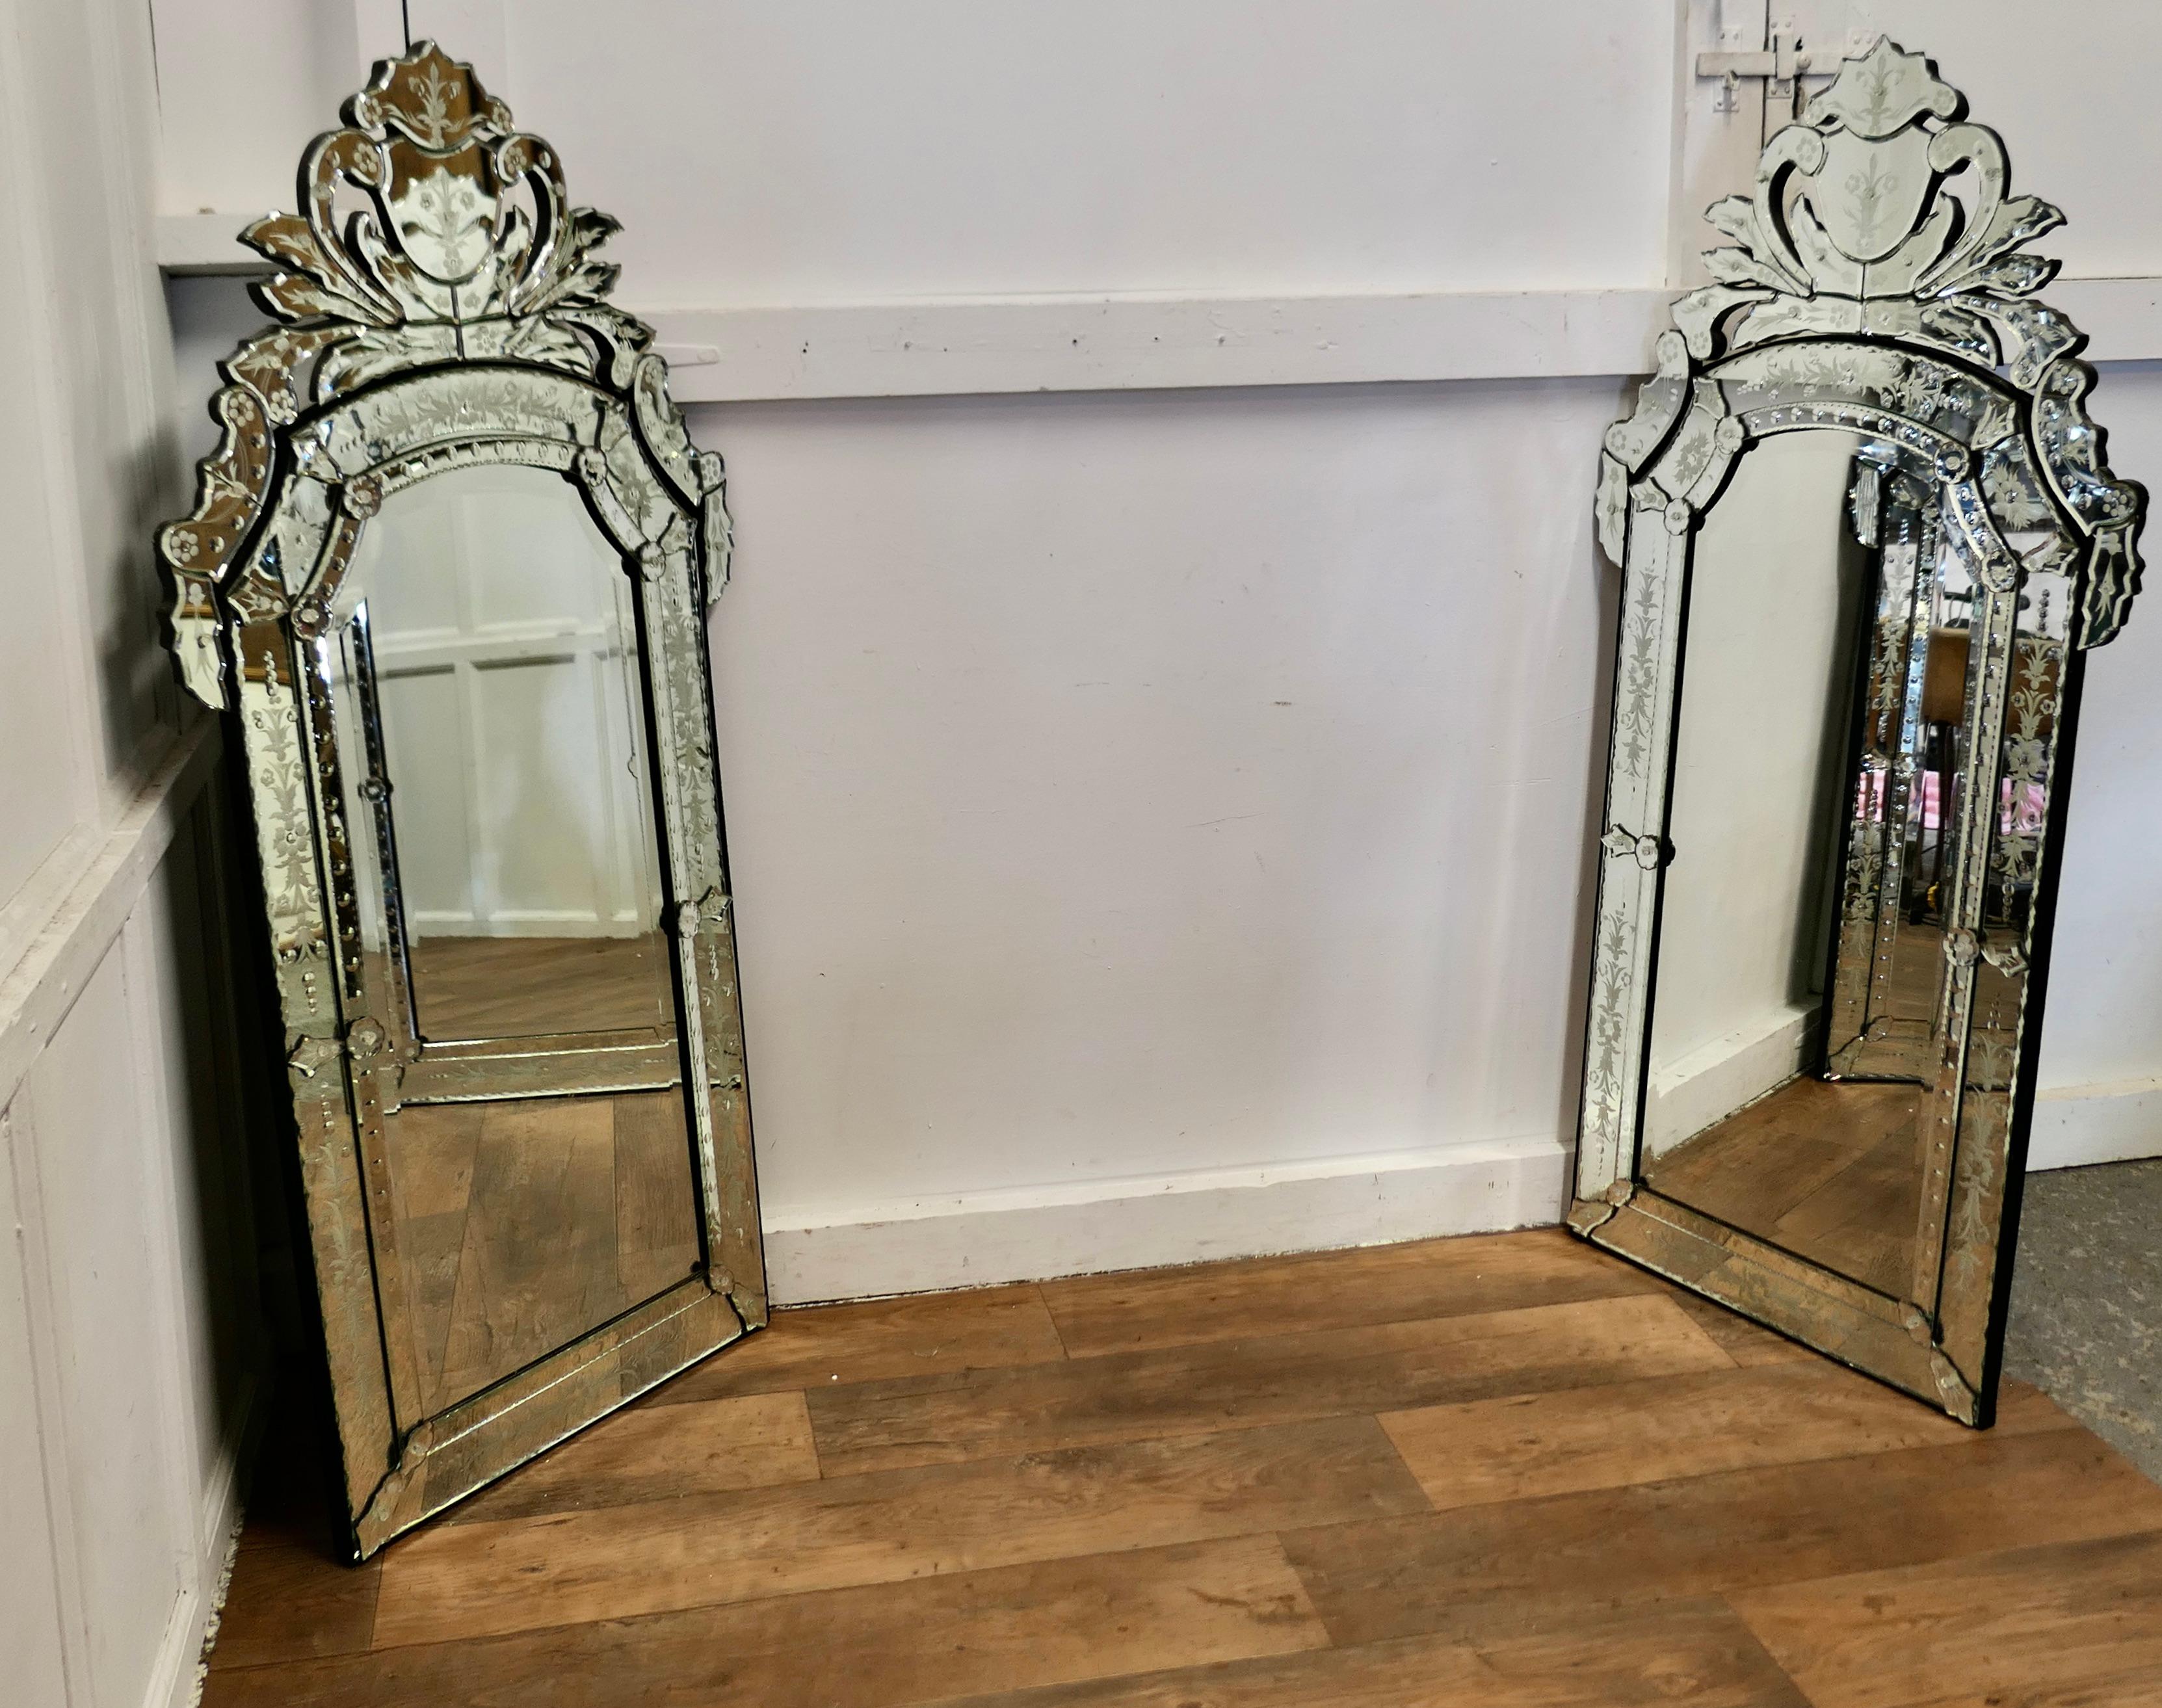 A Superb Pair of Large Venetian Pier Mirrors

These are  most outstanding pieces, they are both in very good condition and are set with elaborate high etched cornices, they also have wide etched borders surrounding the central mirror
There are no